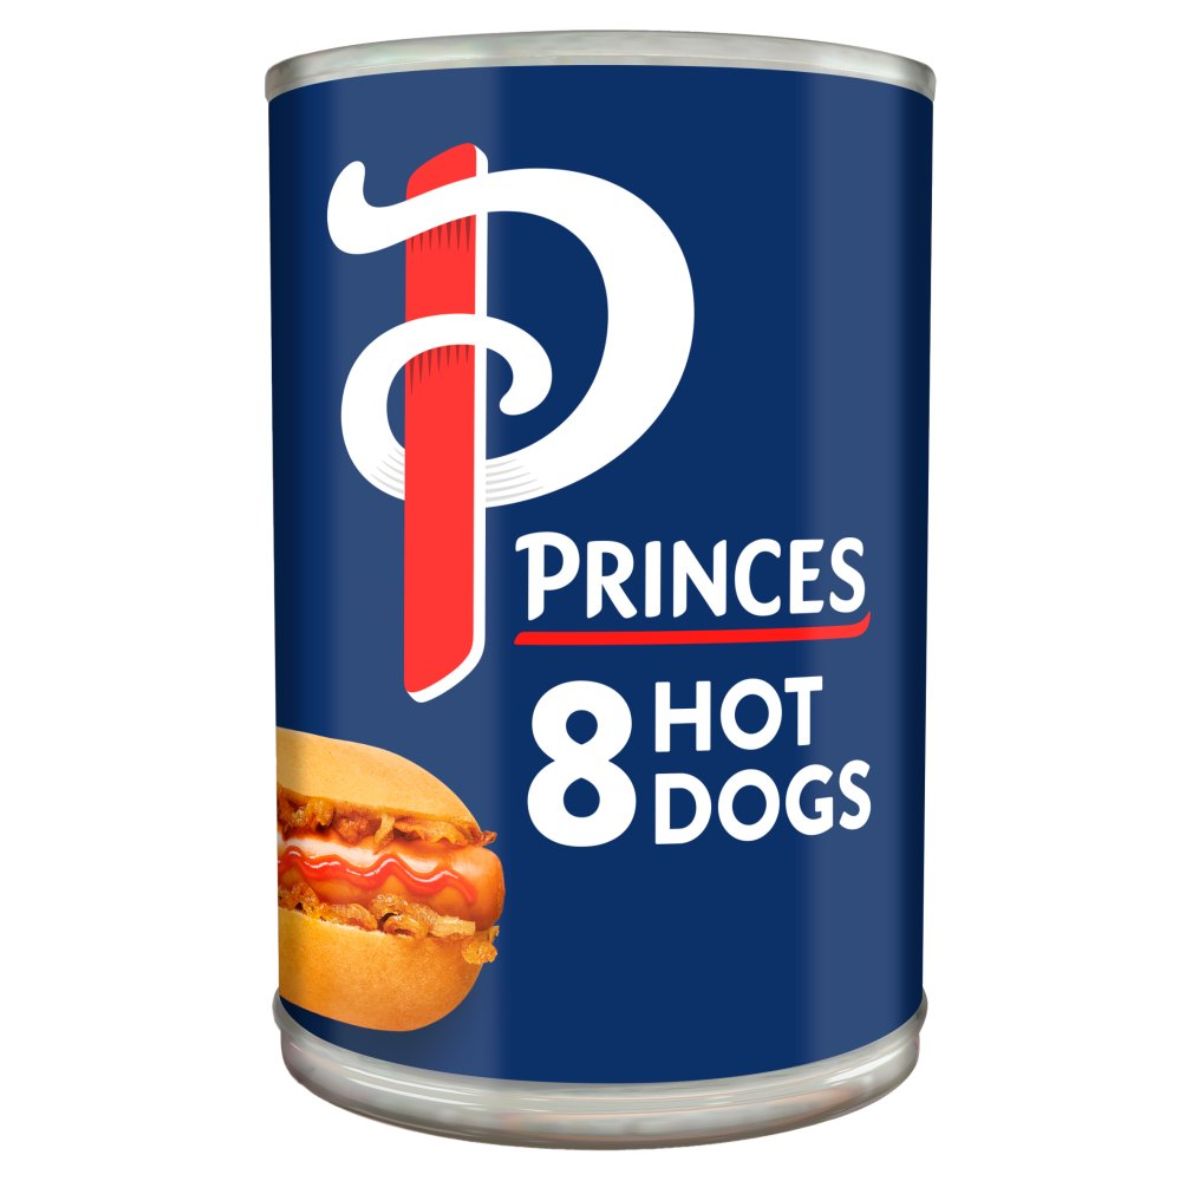 A can of Princes - 8 Hot Dogs - 400g on a white background.